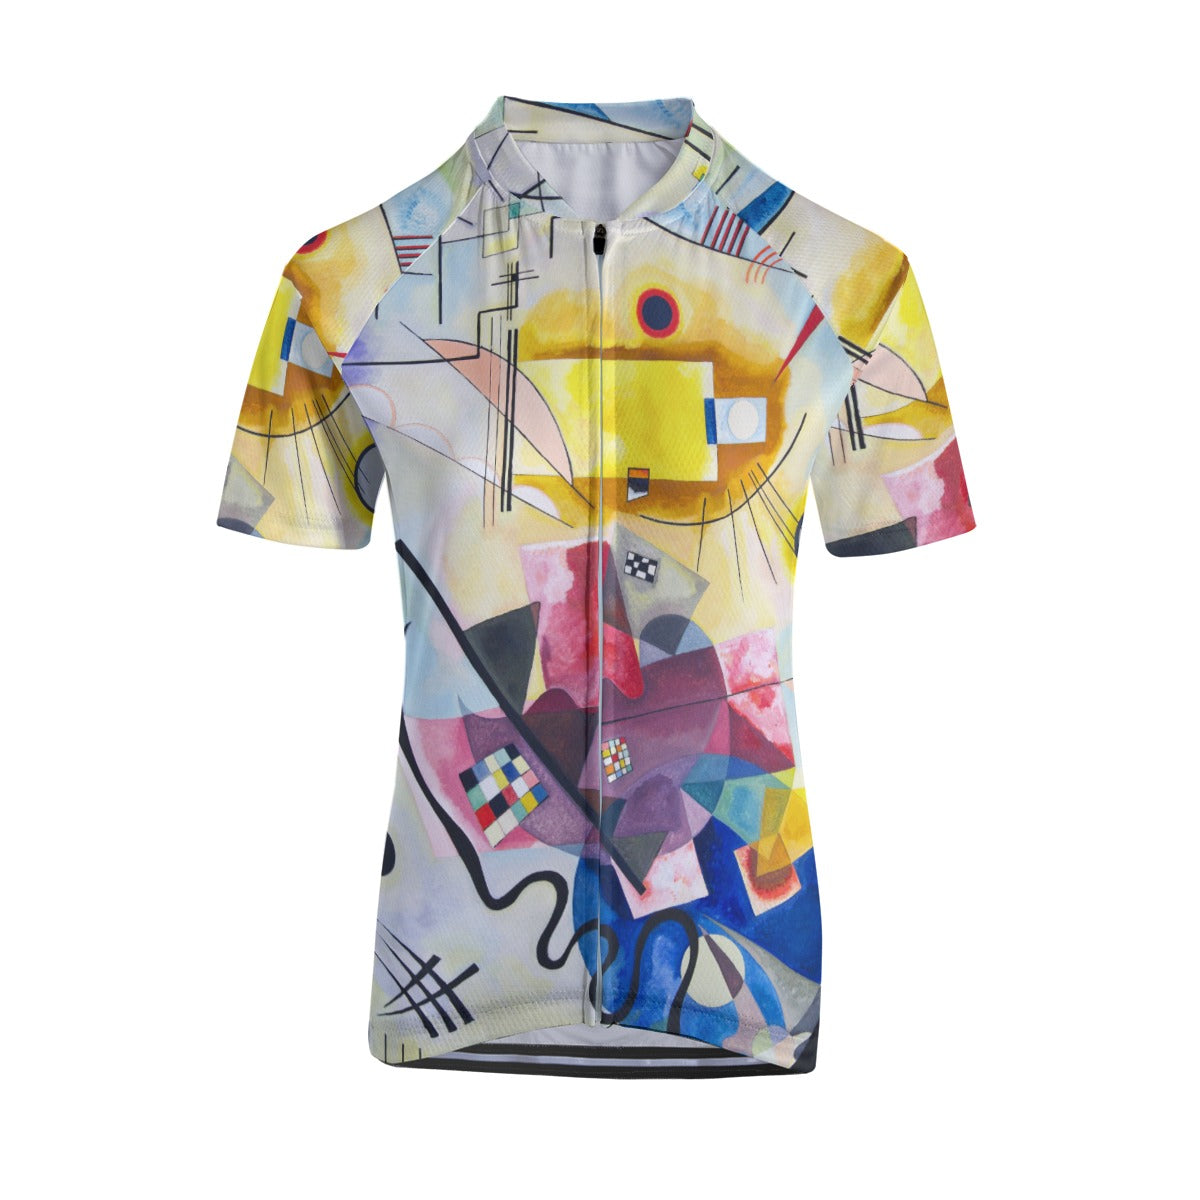 Bold and colorful women's cycling jersey